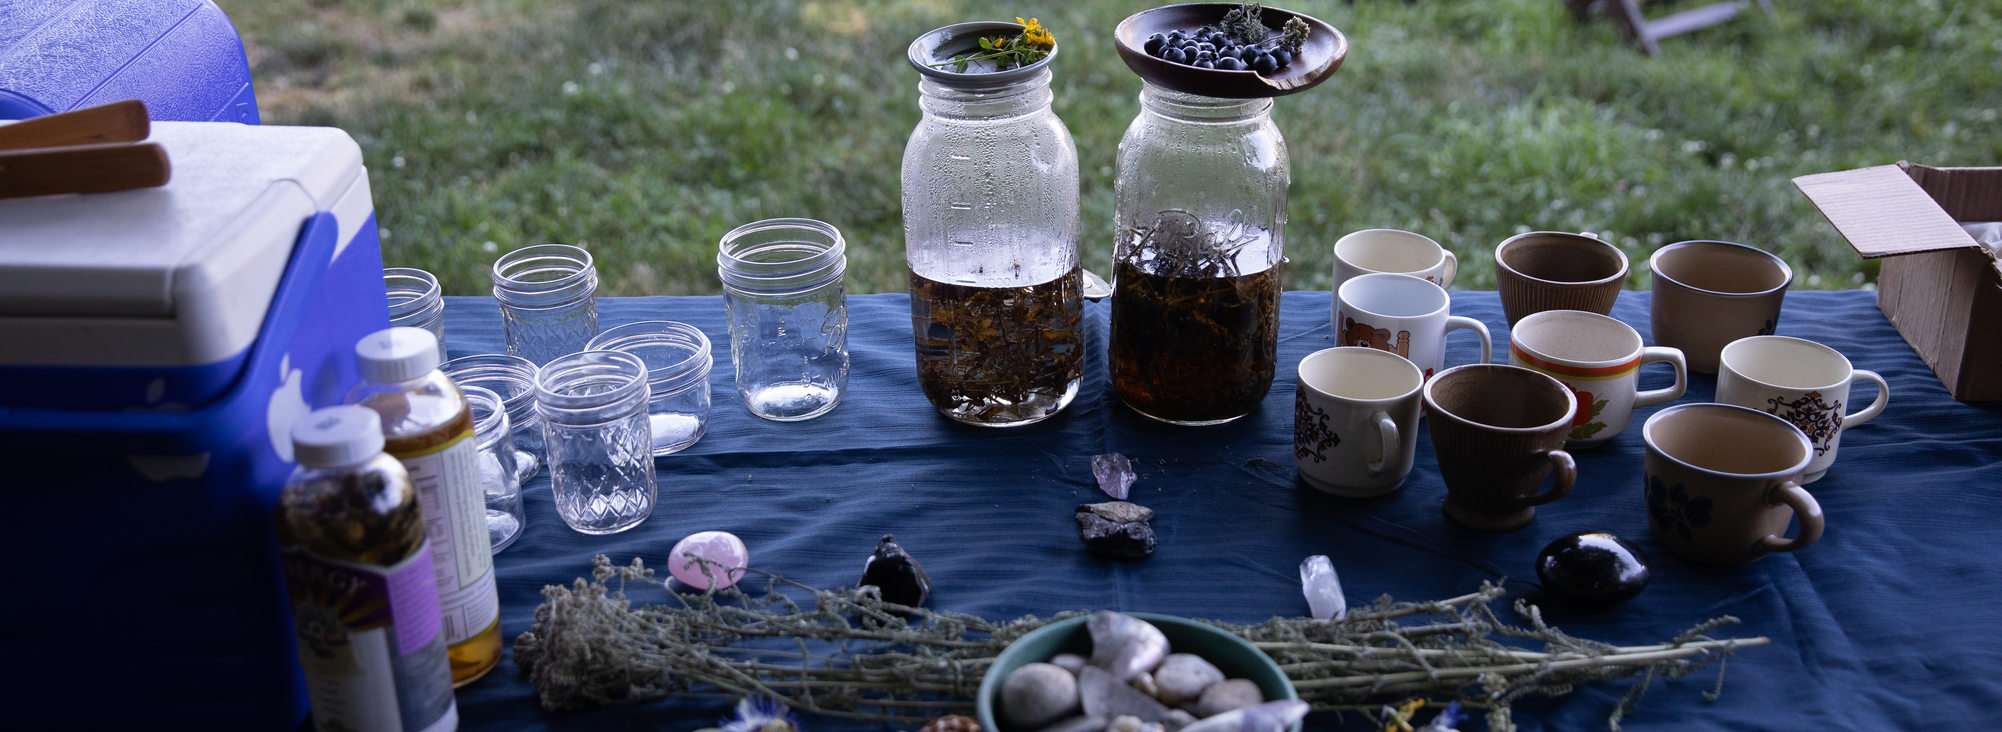 Atabey Medicine table with a blue table cloth and mason jars, plants, and stones